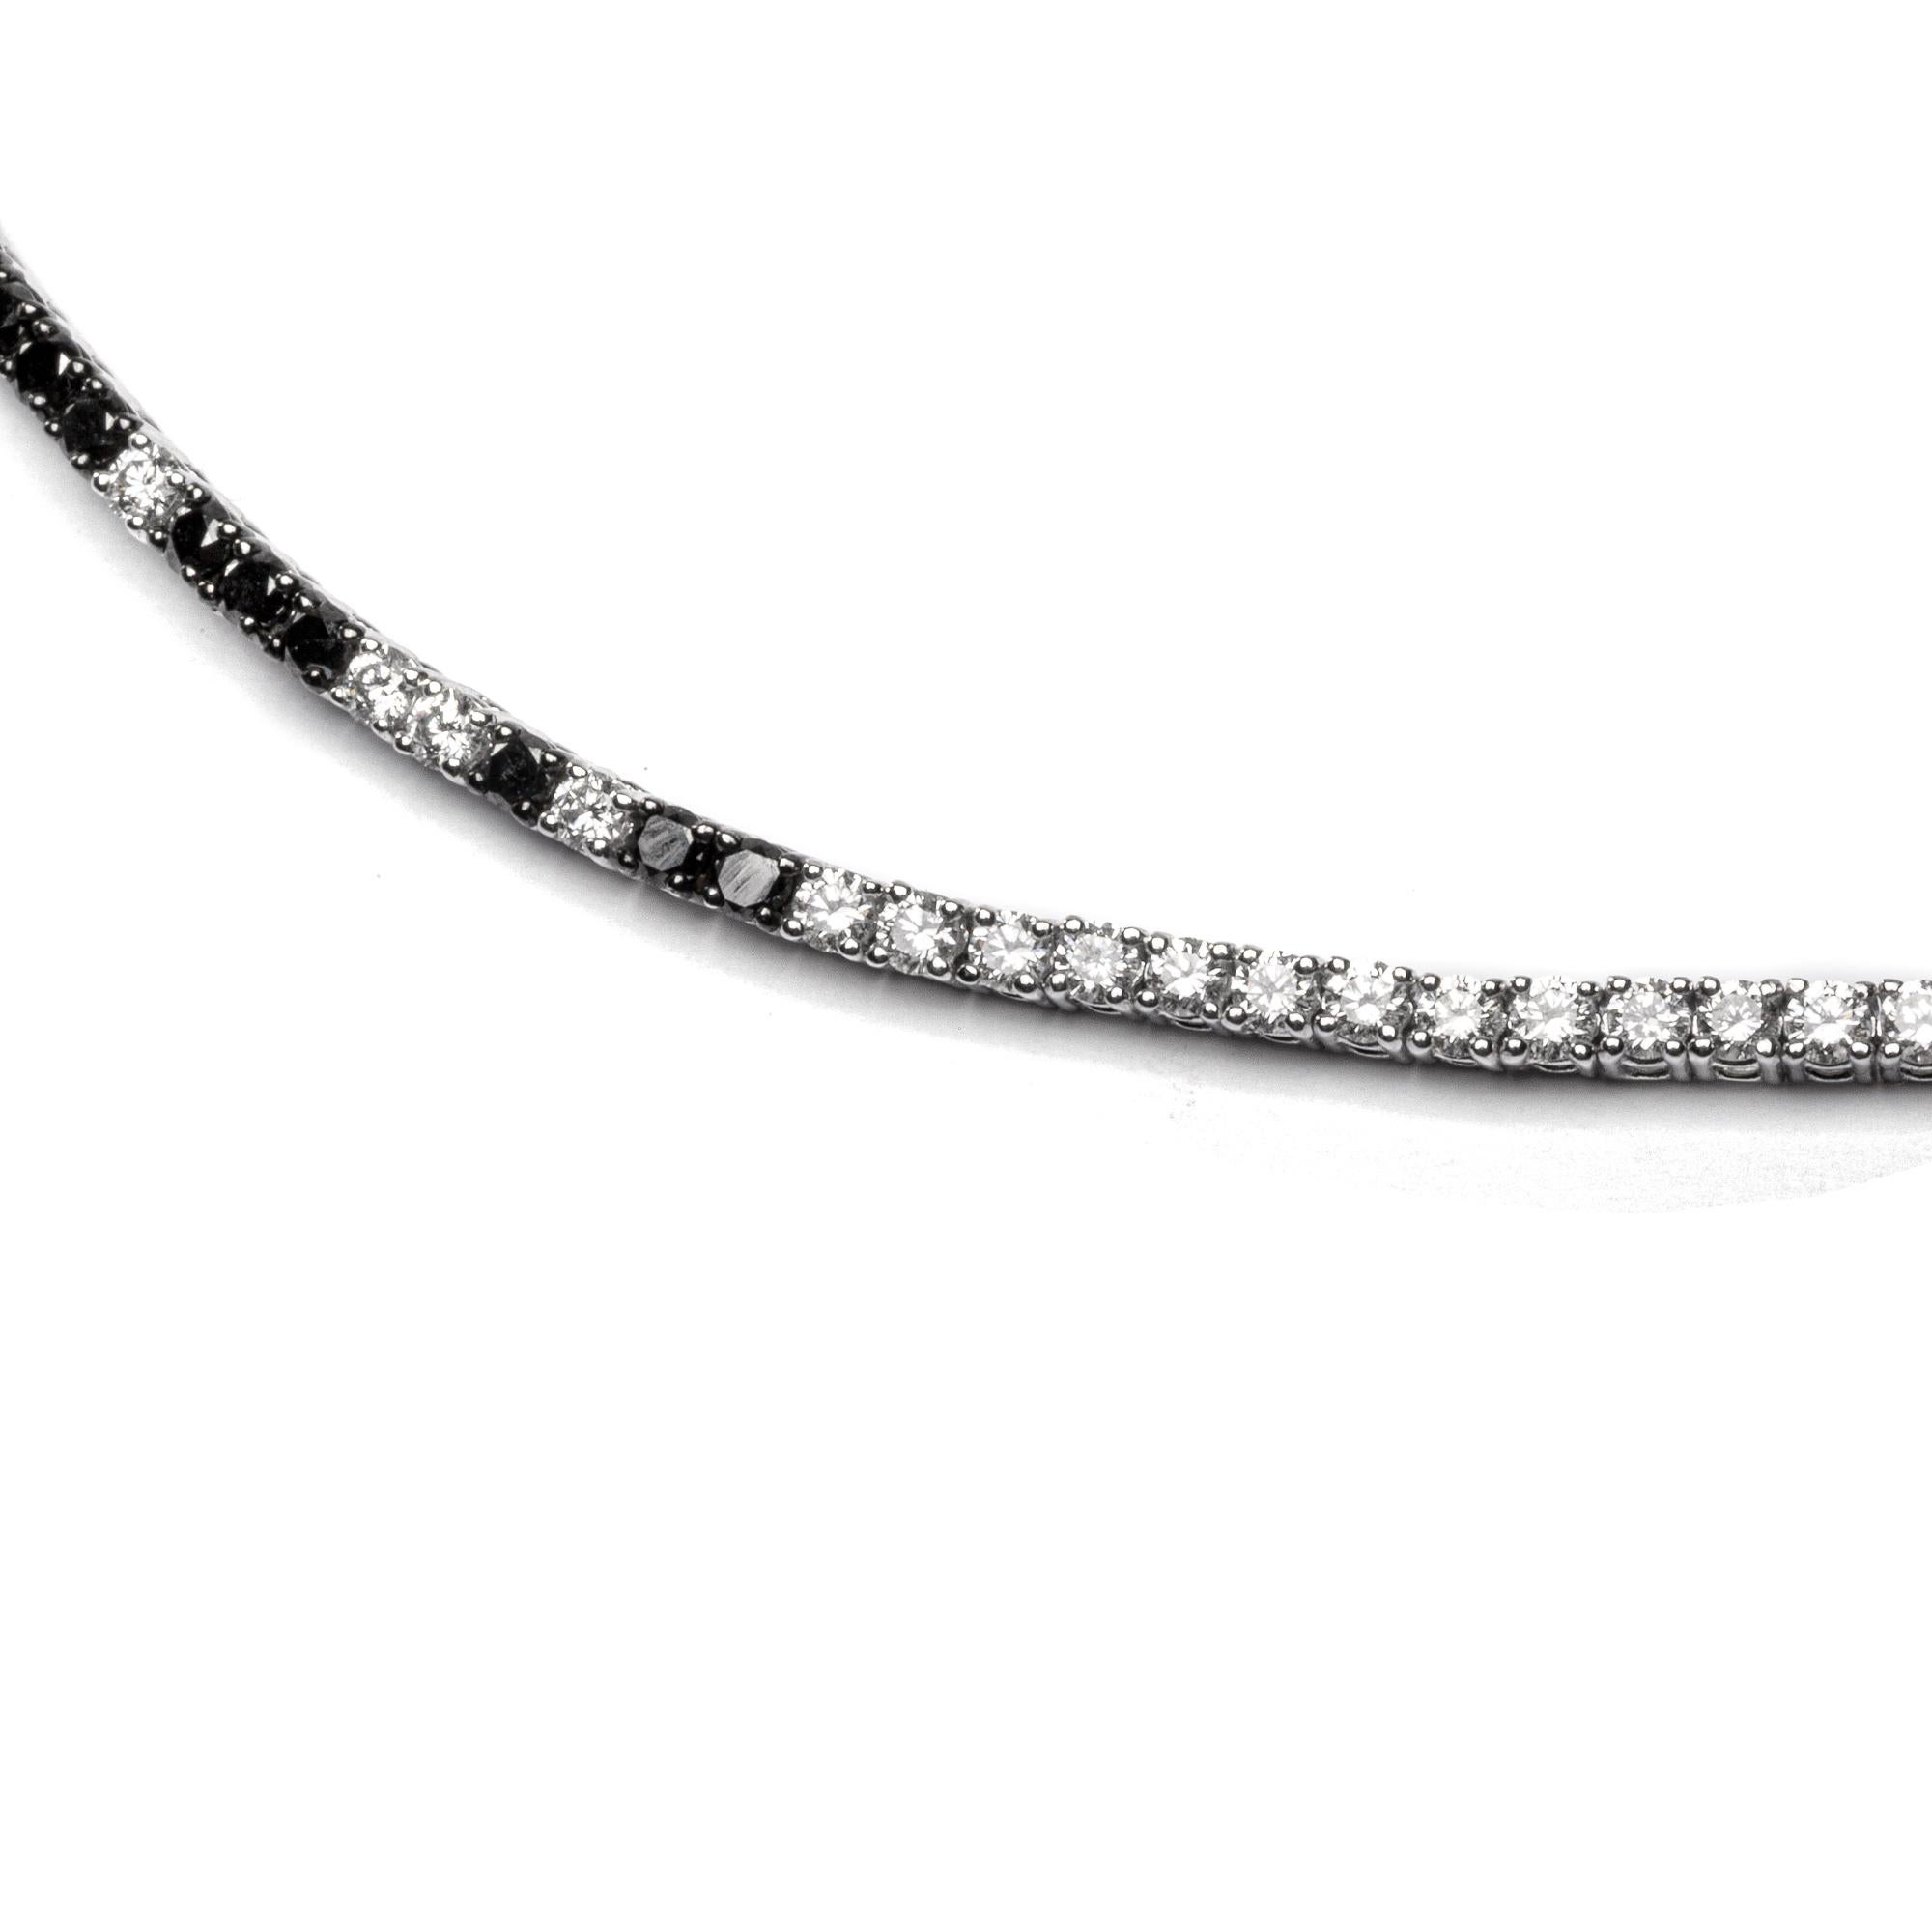 Alex Jona design collection, hand crafted in Italy, 18 karats white gold tennis bracelet, 7 in. long, set with 47 white diamonds weighing 1.70 carats in total, alternating with 29 black diamonds weighing 1.00 carat in total.
Alex Jona jewels stand